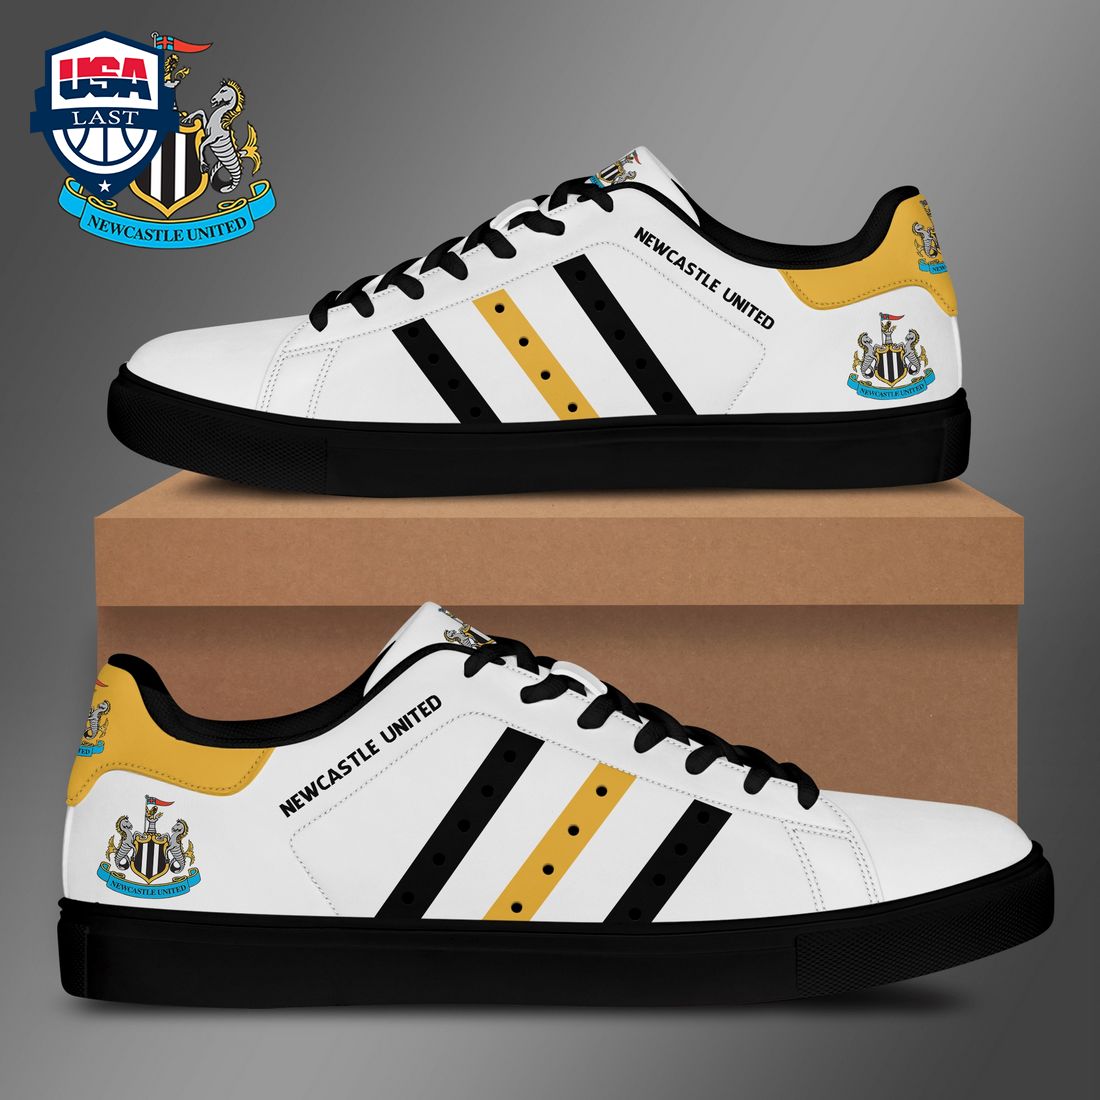 newcastle-united-fc-black-yellow-stripes-stan-smith-low-top-shoes-1-nxeBo.jpg